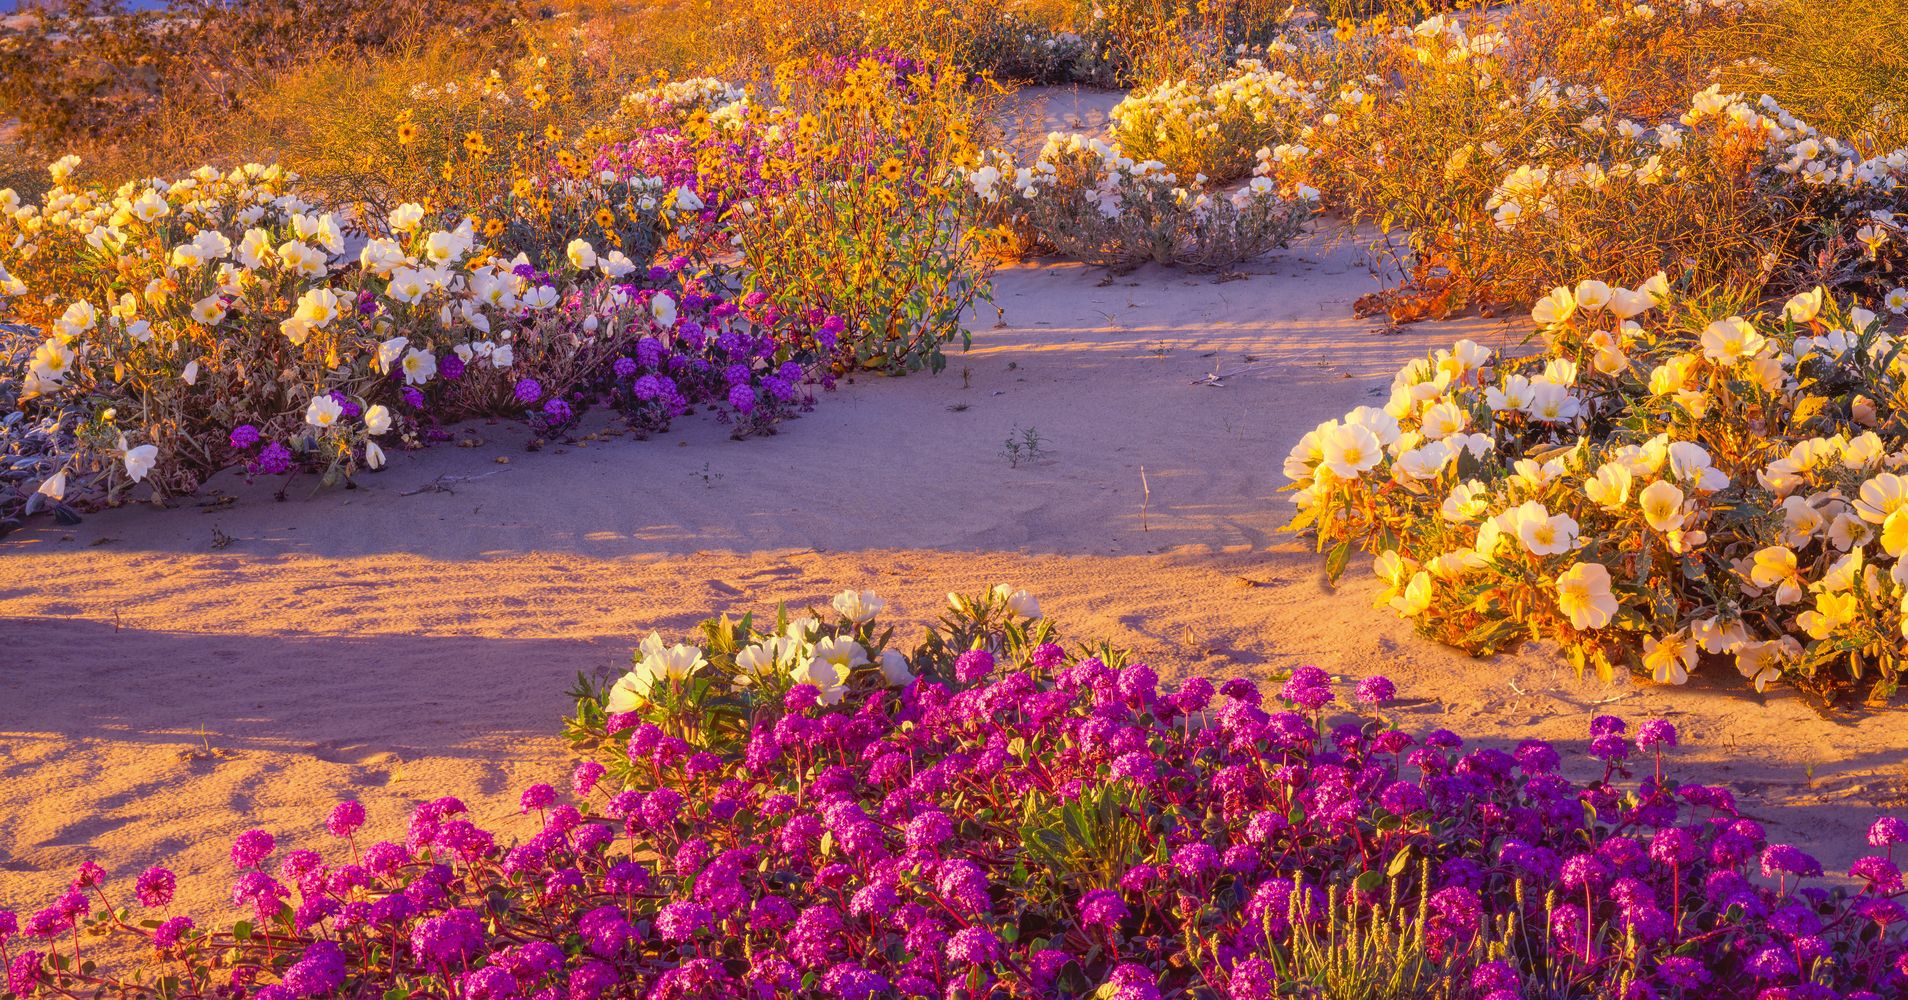 Spectacular 'Super Bloom' Is Just Days Away In This California Desert